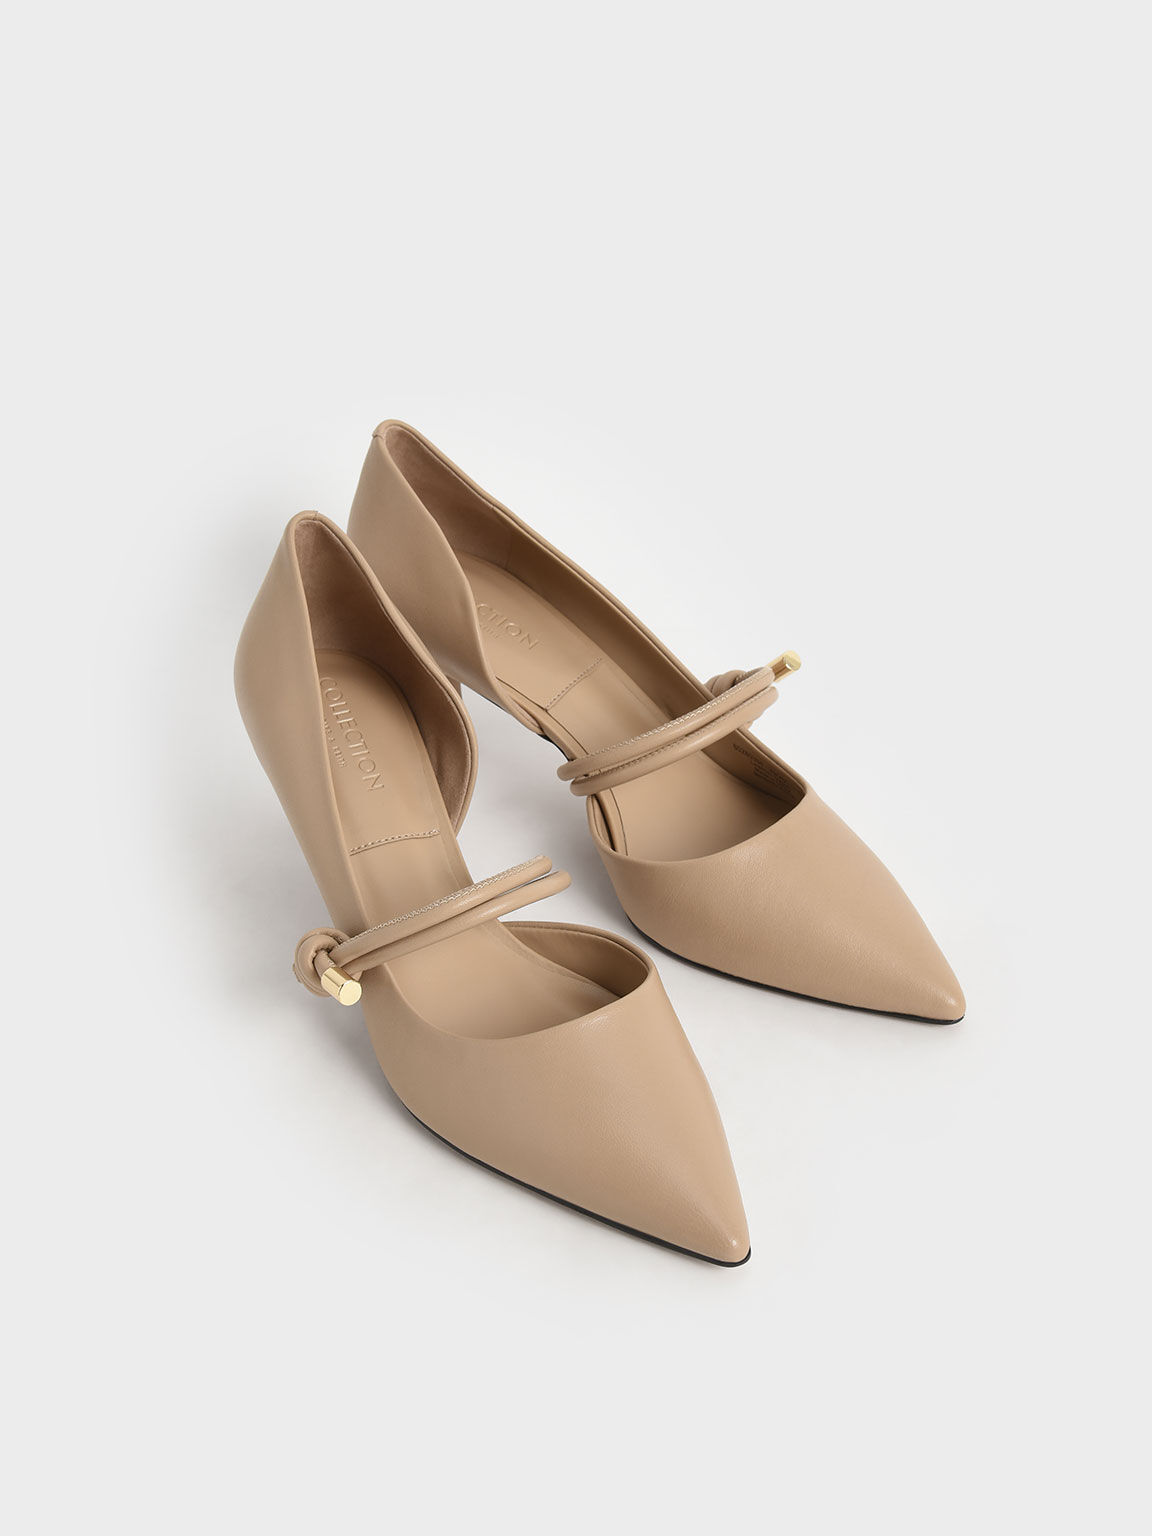 Leather Knotted-Strap Half D'Orsay Pumps, Nude, hi-res